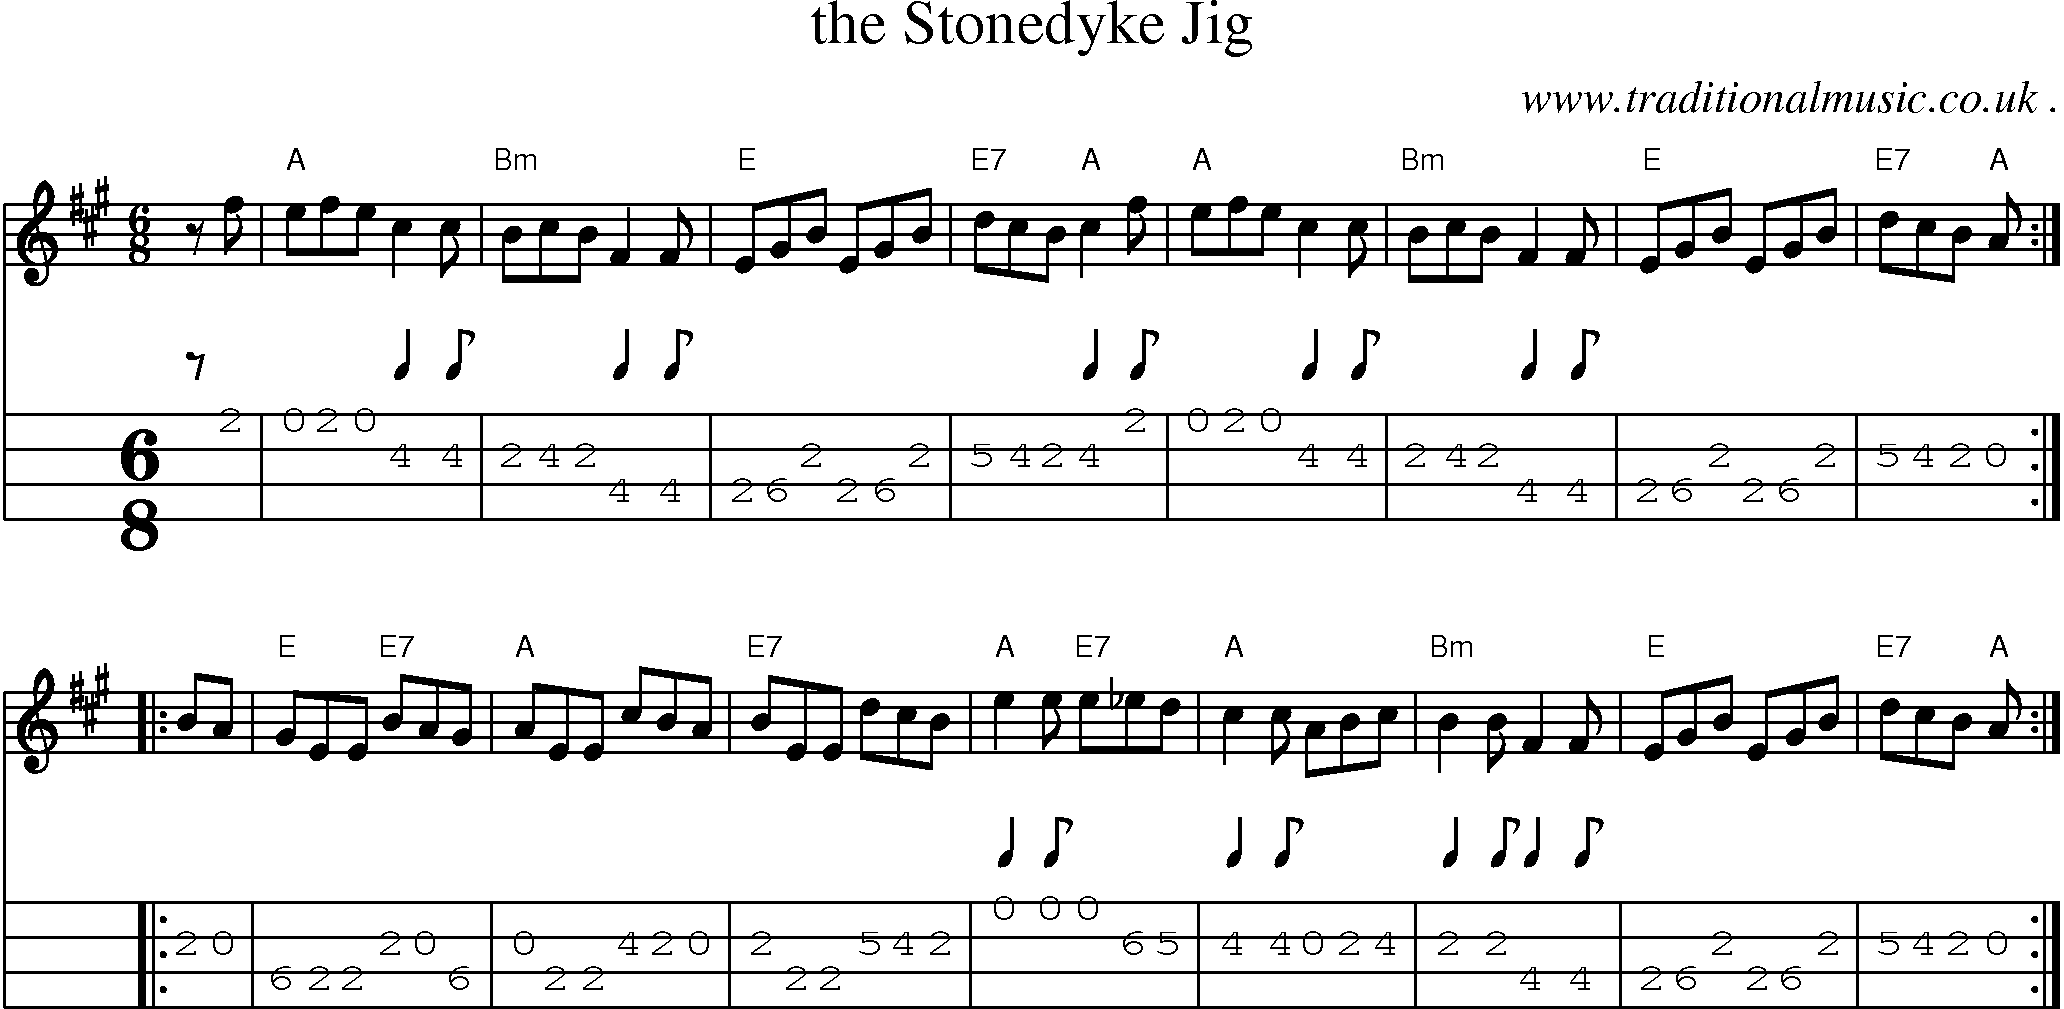 Sheet-music  score, Chords and Mandolin Tabs for The Stonedyke Jig